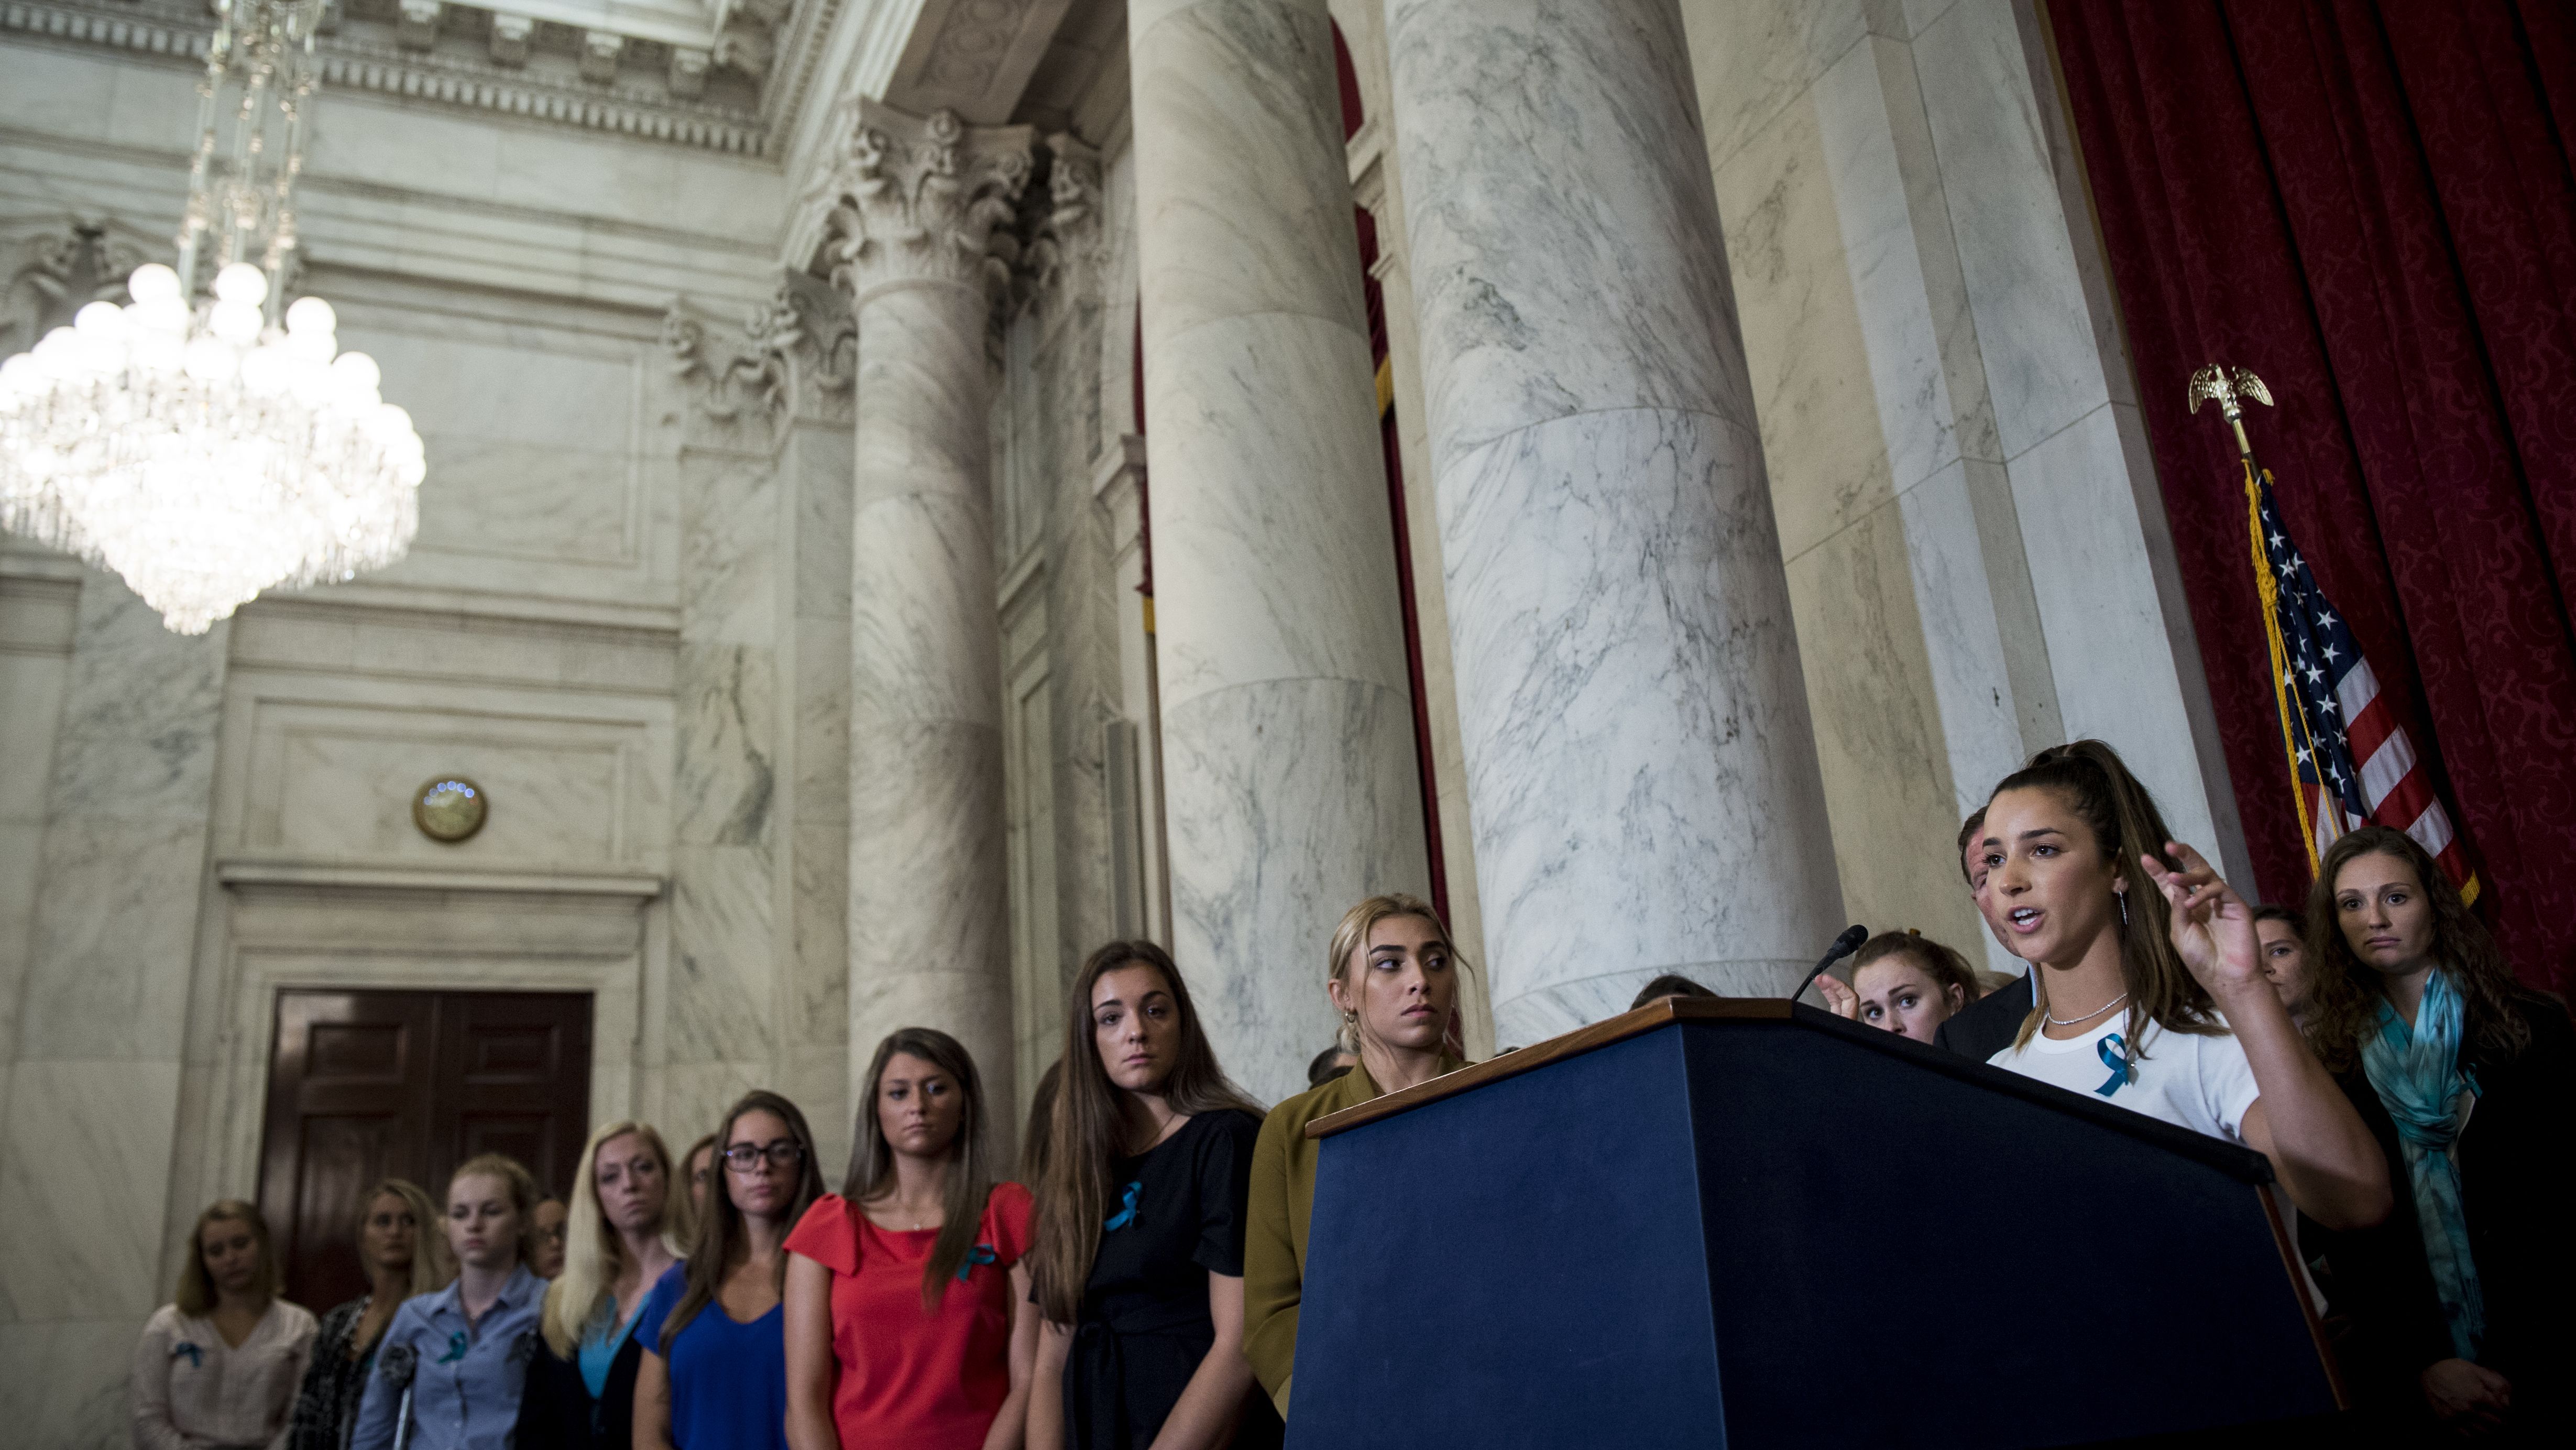 Olympic gold medalist in gymnastics and survivor of sexual abuse by Larry Nassar Aly Raisman speaks during a press conference in the Kennedy Caucus Room in the Russell Senate Office Building on July 24, 2018. Over 60 victims were joined by Senate Democrats to discuss ways to prevent further abuse.